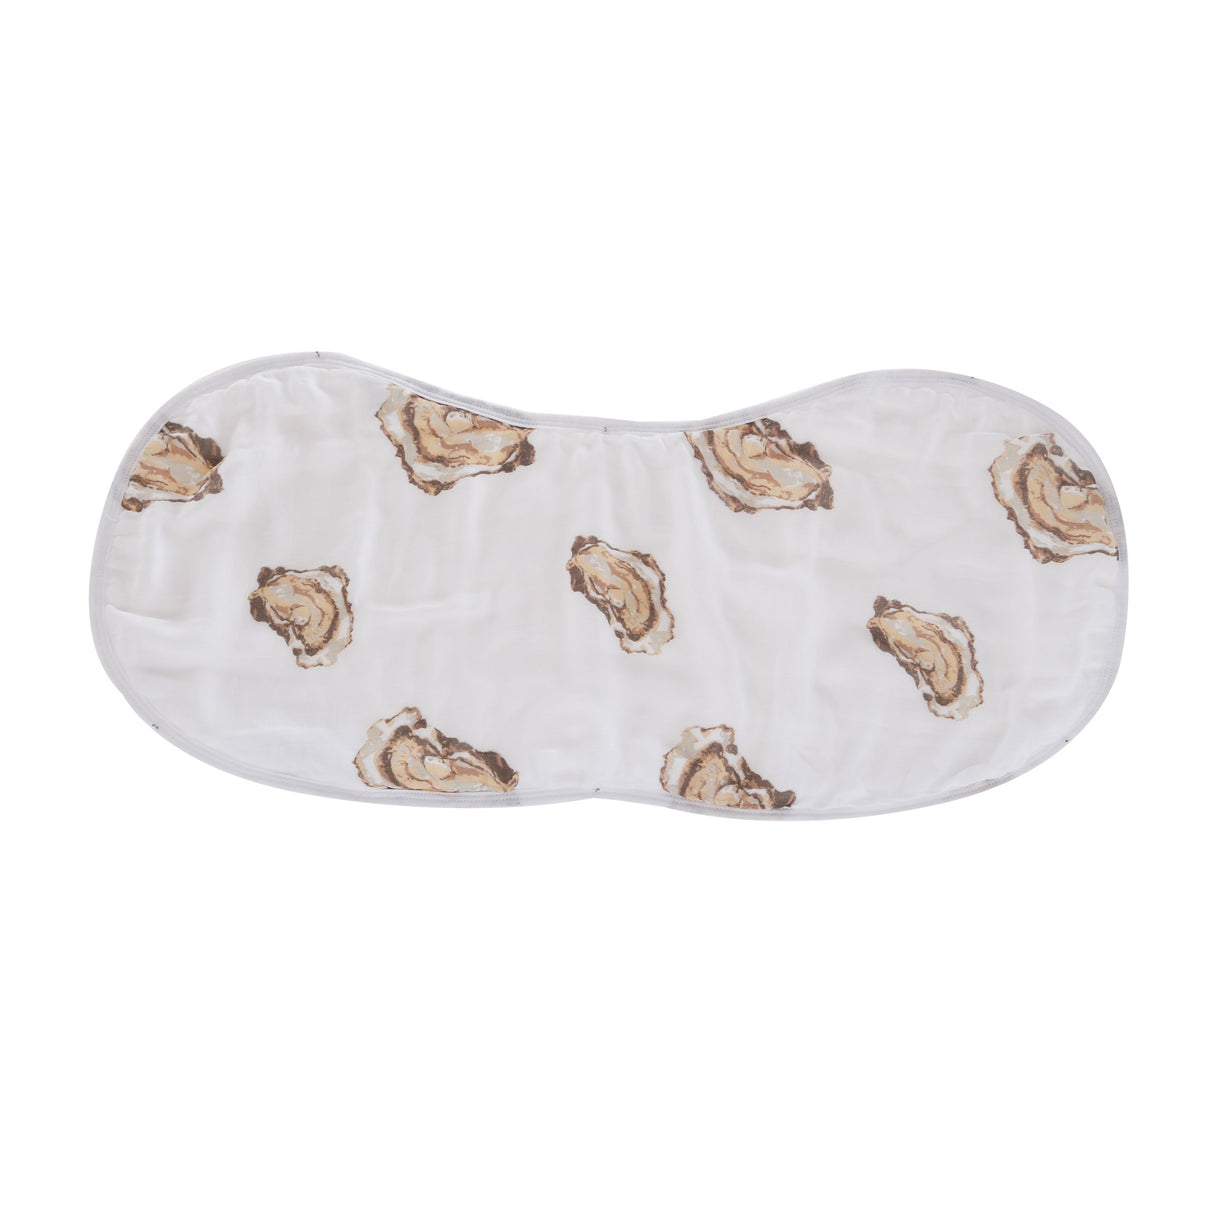 2-in-1 Burp Cloth and Bib: Aw Shucks! Oyster by Little Hometown - Aiden's Corner Baby & Toddler Clothes, Toys, Teethers, Feeding and Accesories